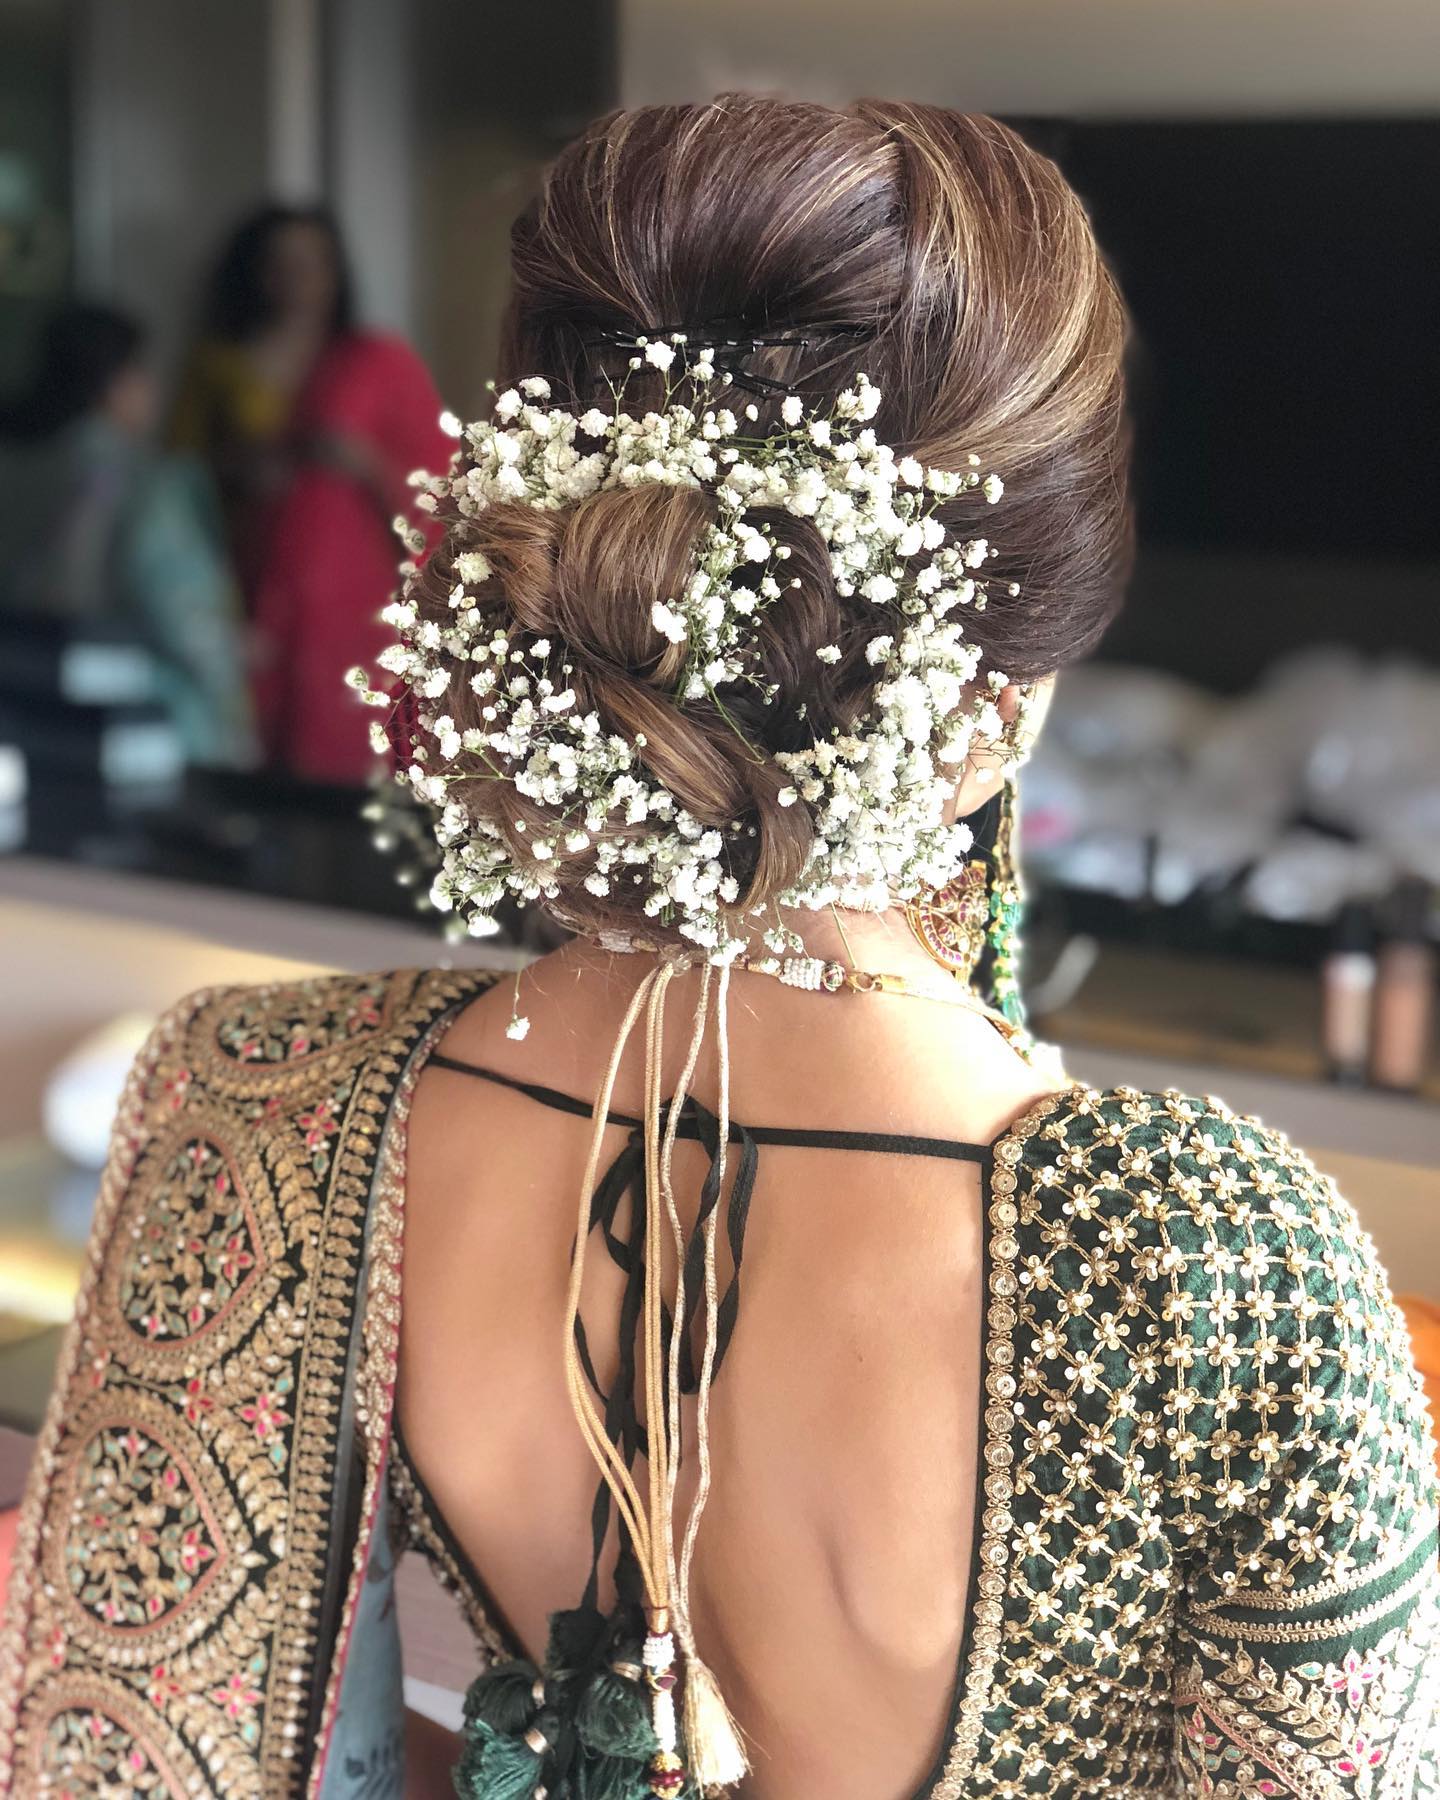 Monsoon Wedding Edition: Fashion To Hair Care Tips For Brides-To-Be!